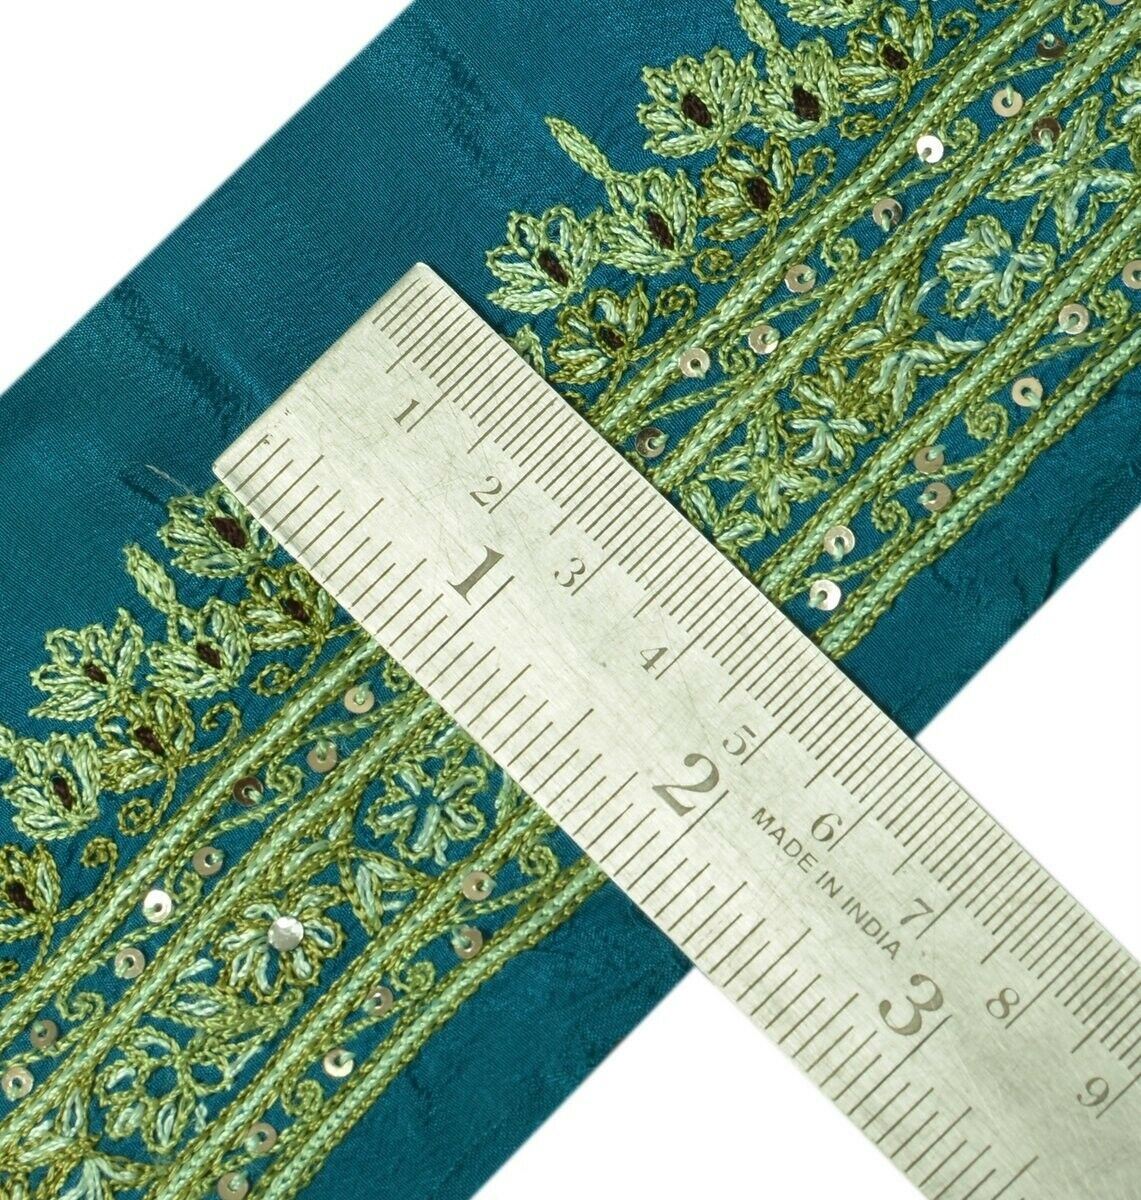 Vintage Sari Border Indian Craft Trim Hand Embroidered Green Sewing Ribbon Lace